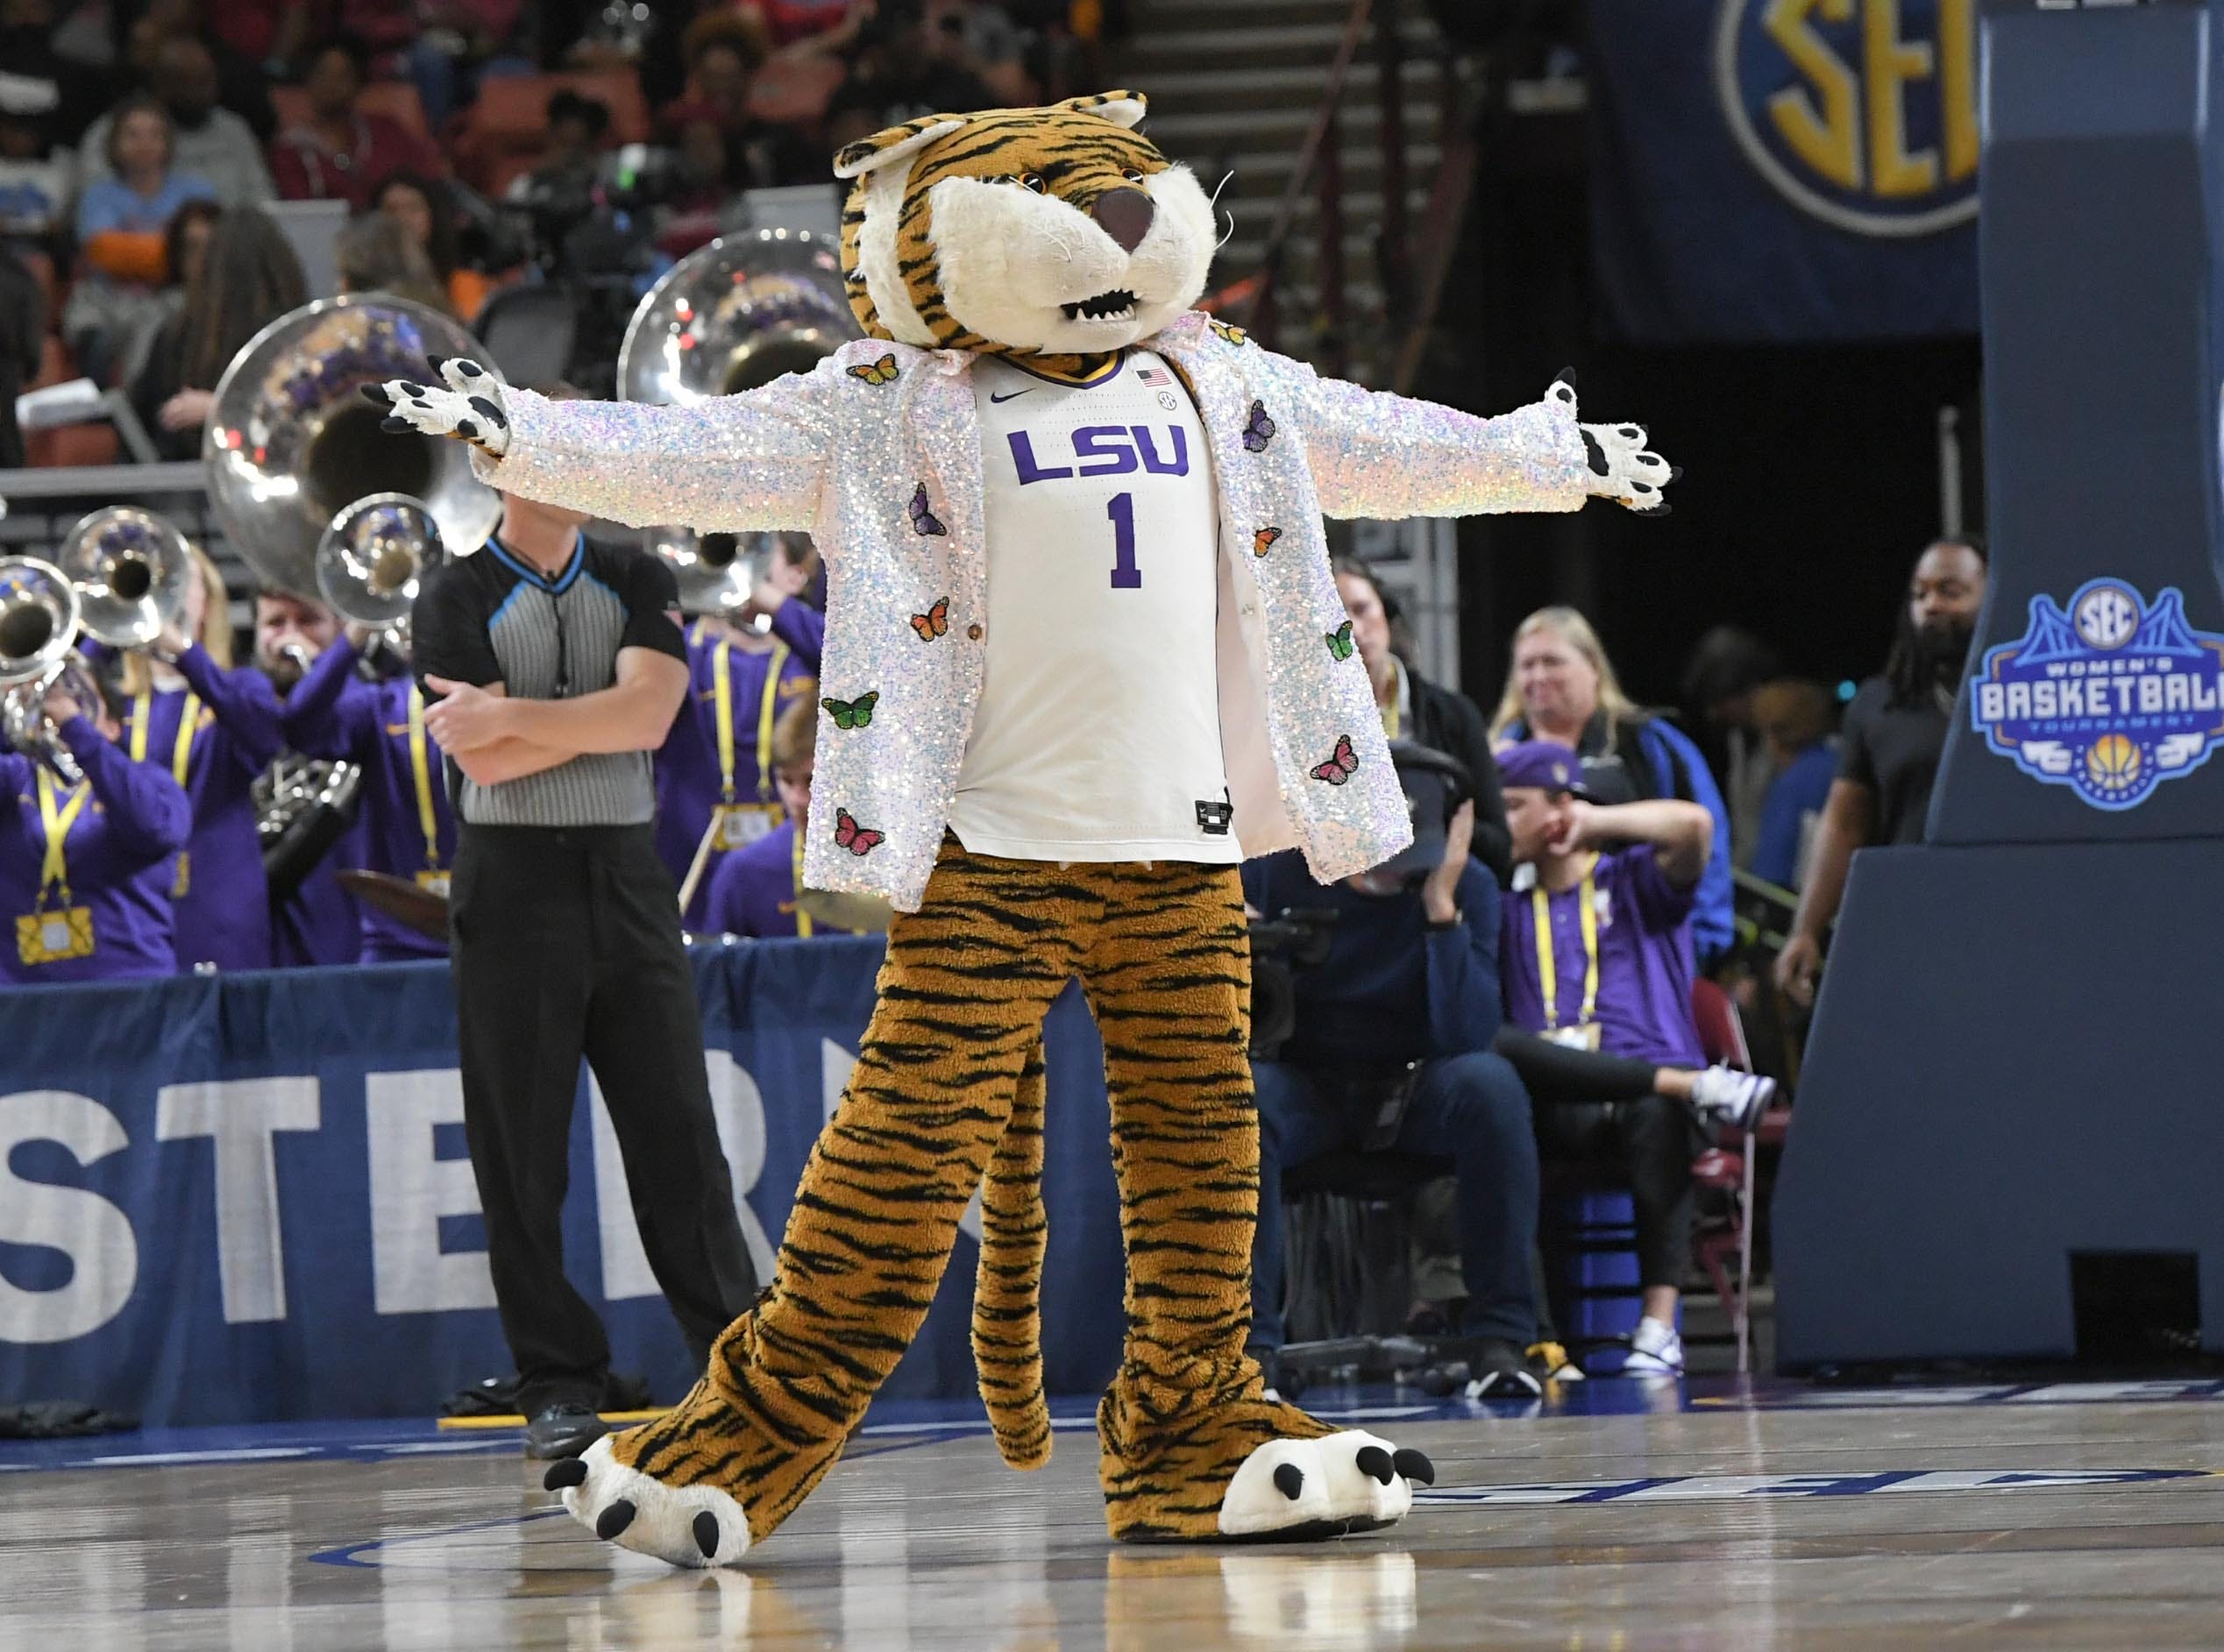 The LSU mascot wears a Kim Mulkey- inspired coat during the second quarter of the SEC Women's Basketball Tournament game at the Bon Secours Wellness Arena in Greenville, S.C. Saturday, March 9, 2024.